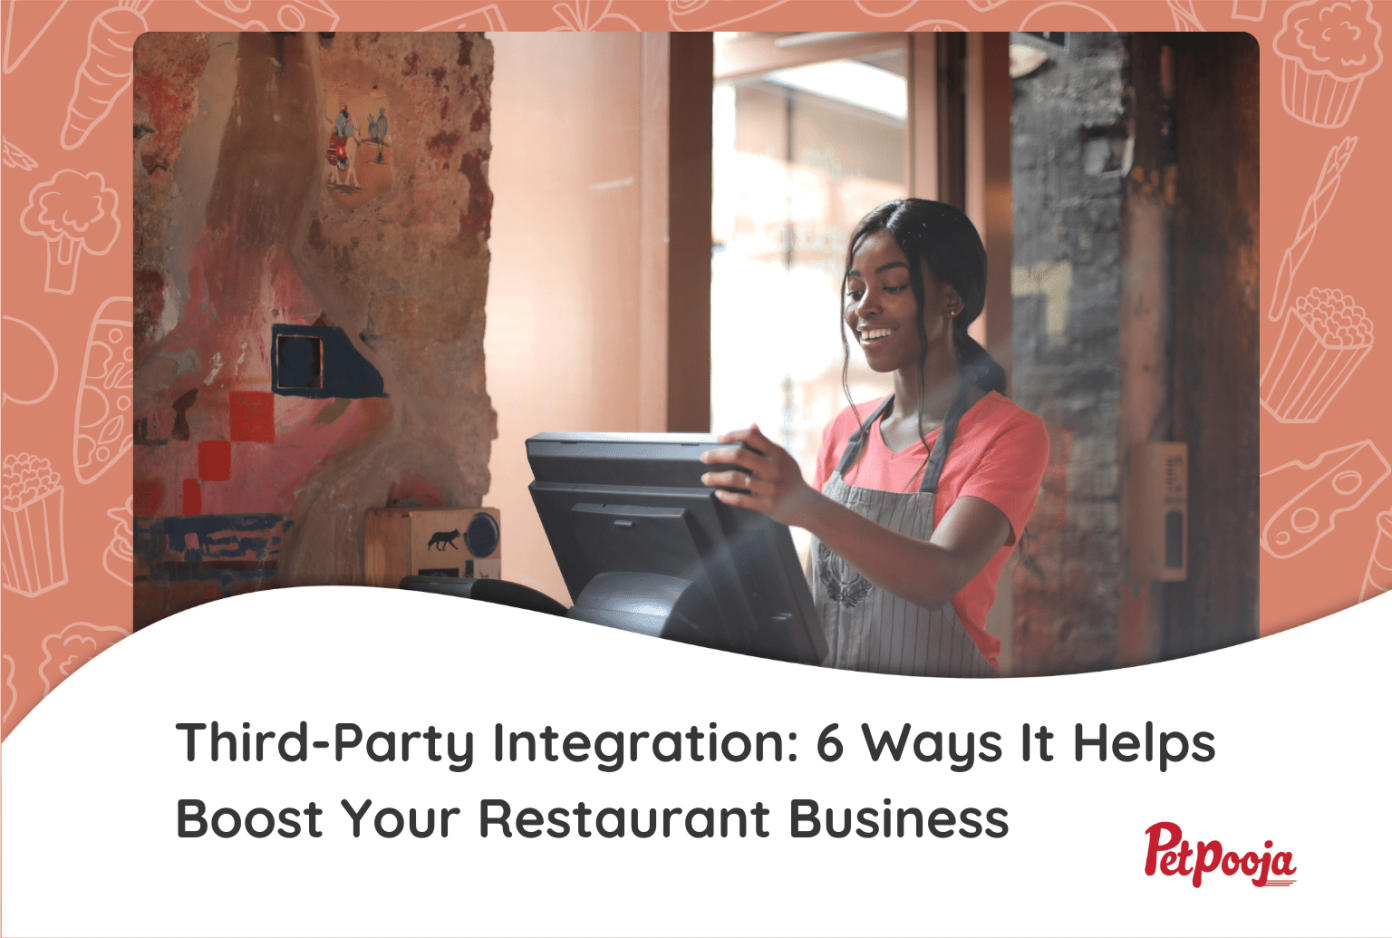 Third-Party Integration: 6 Ways It Helps Boost Your Restaurant Business